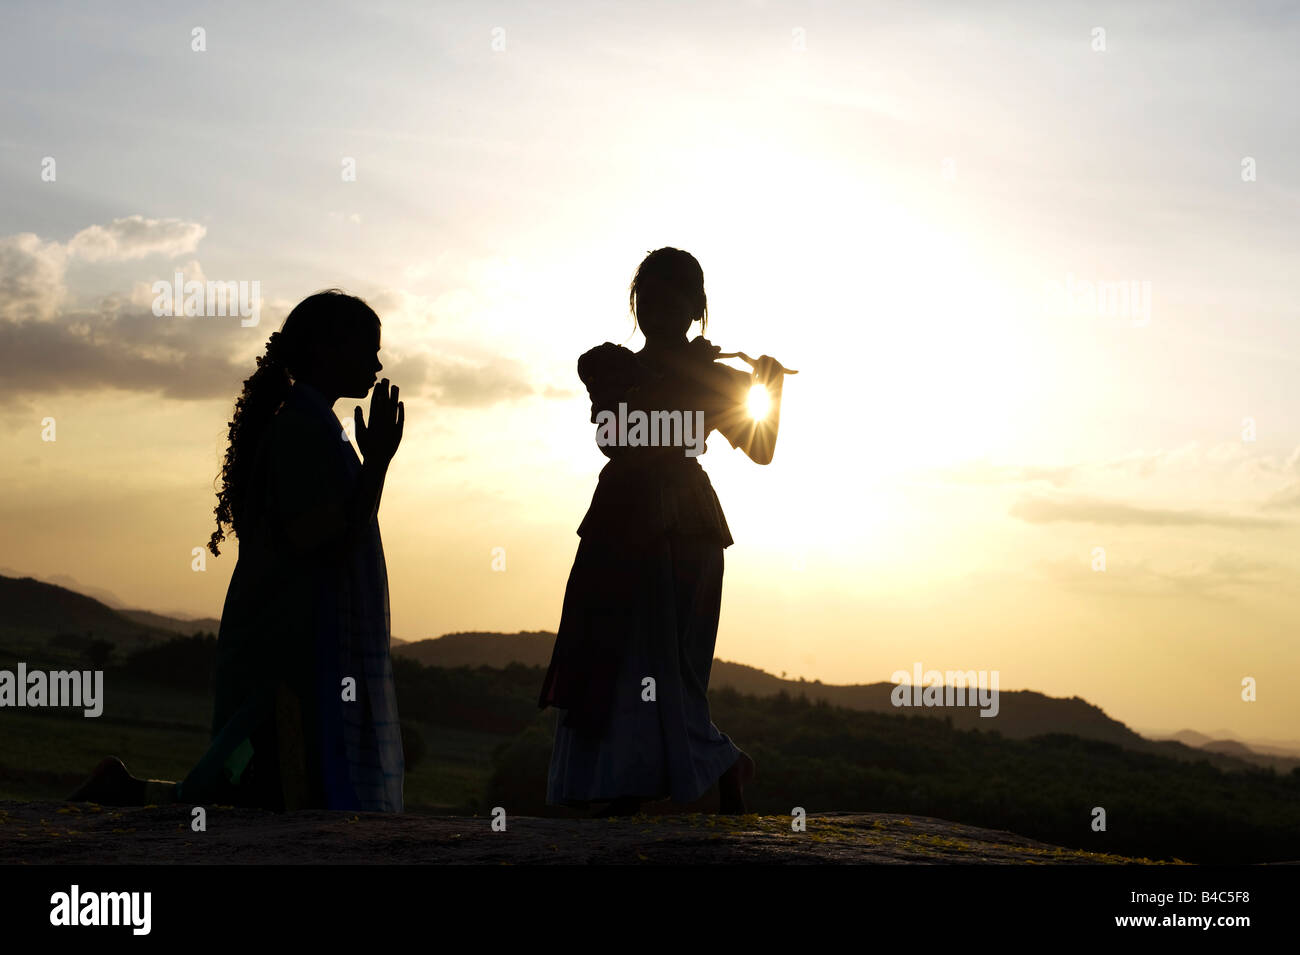 Two Indian sisters performing a hindu devotional dance on a rock at sunset silhouette. Andhra Pradesh, India Stock Photo